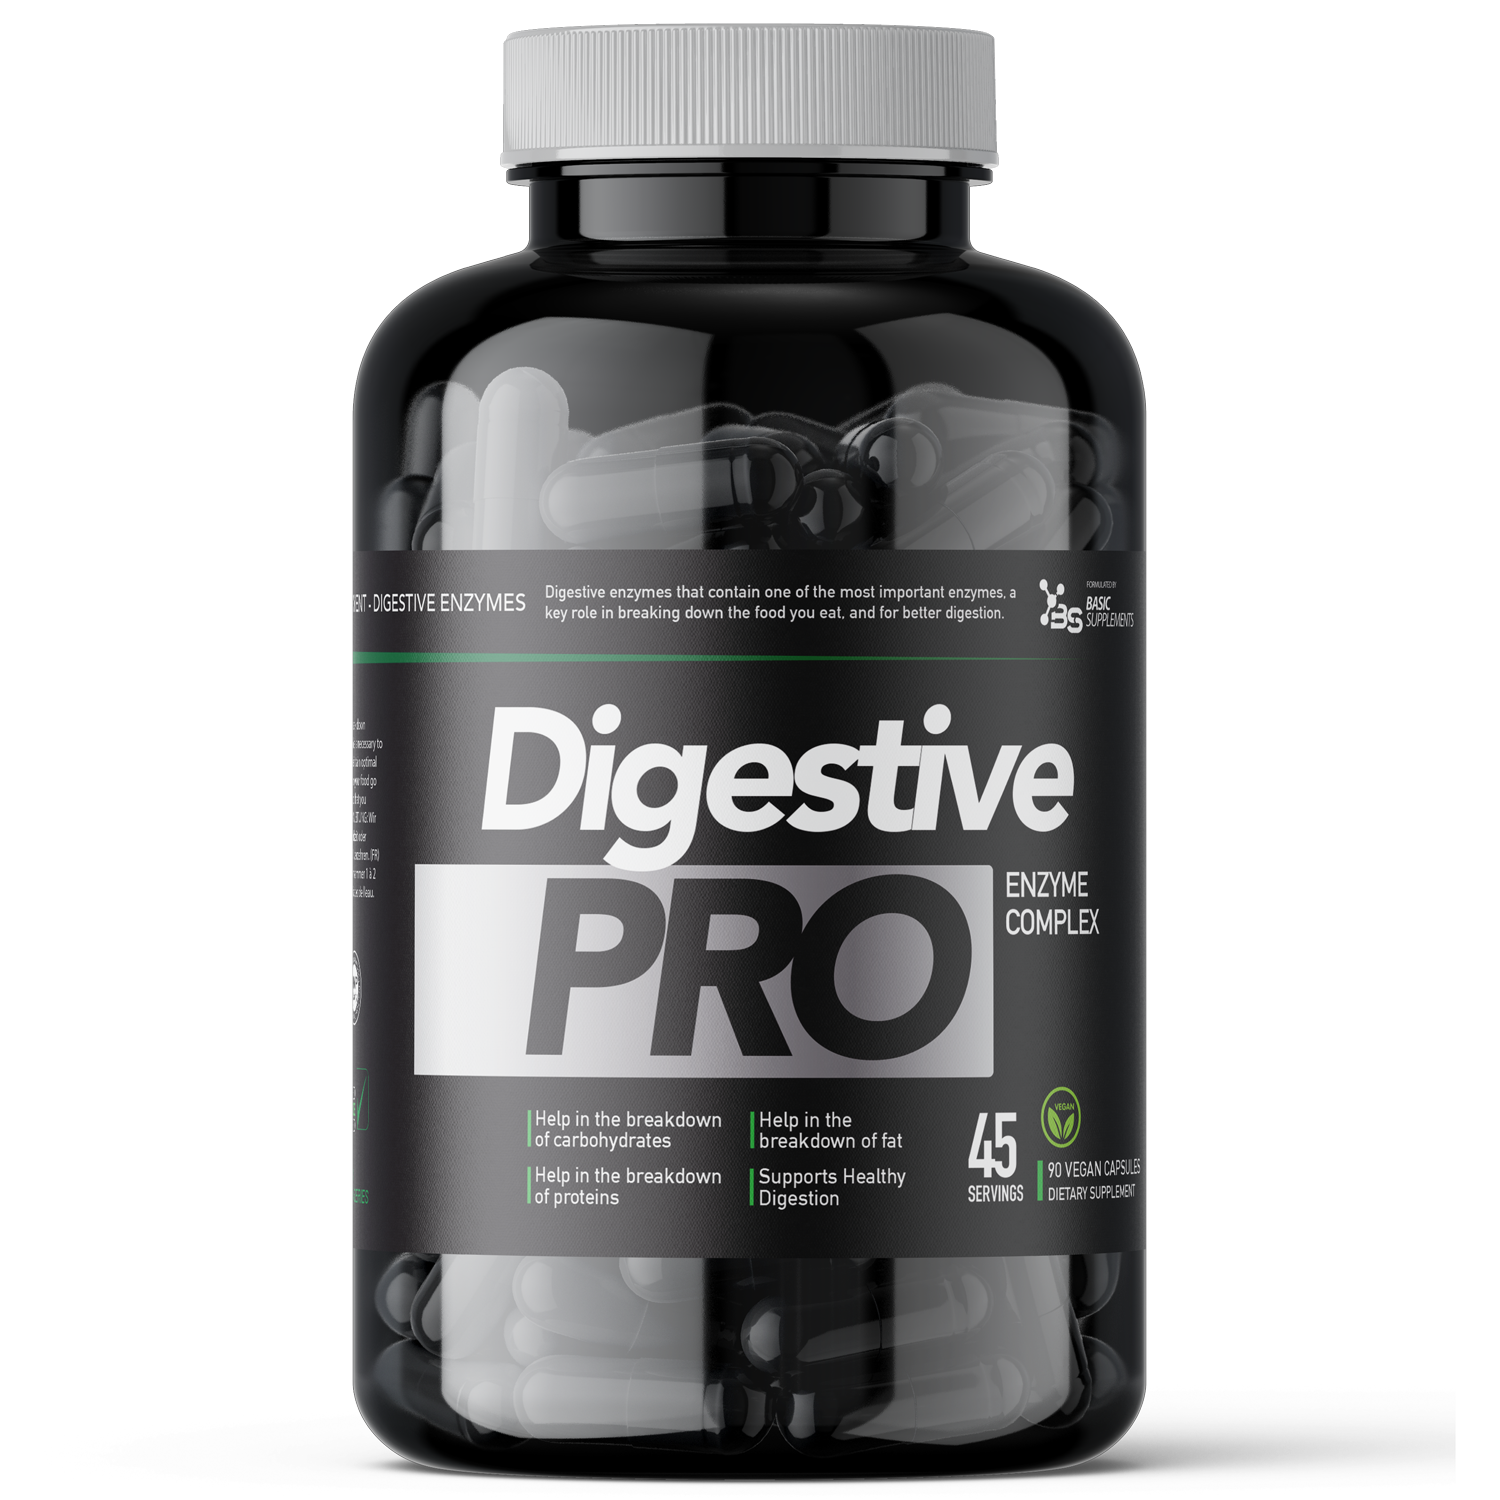 digestive-enzyme-complex-basic-supplements